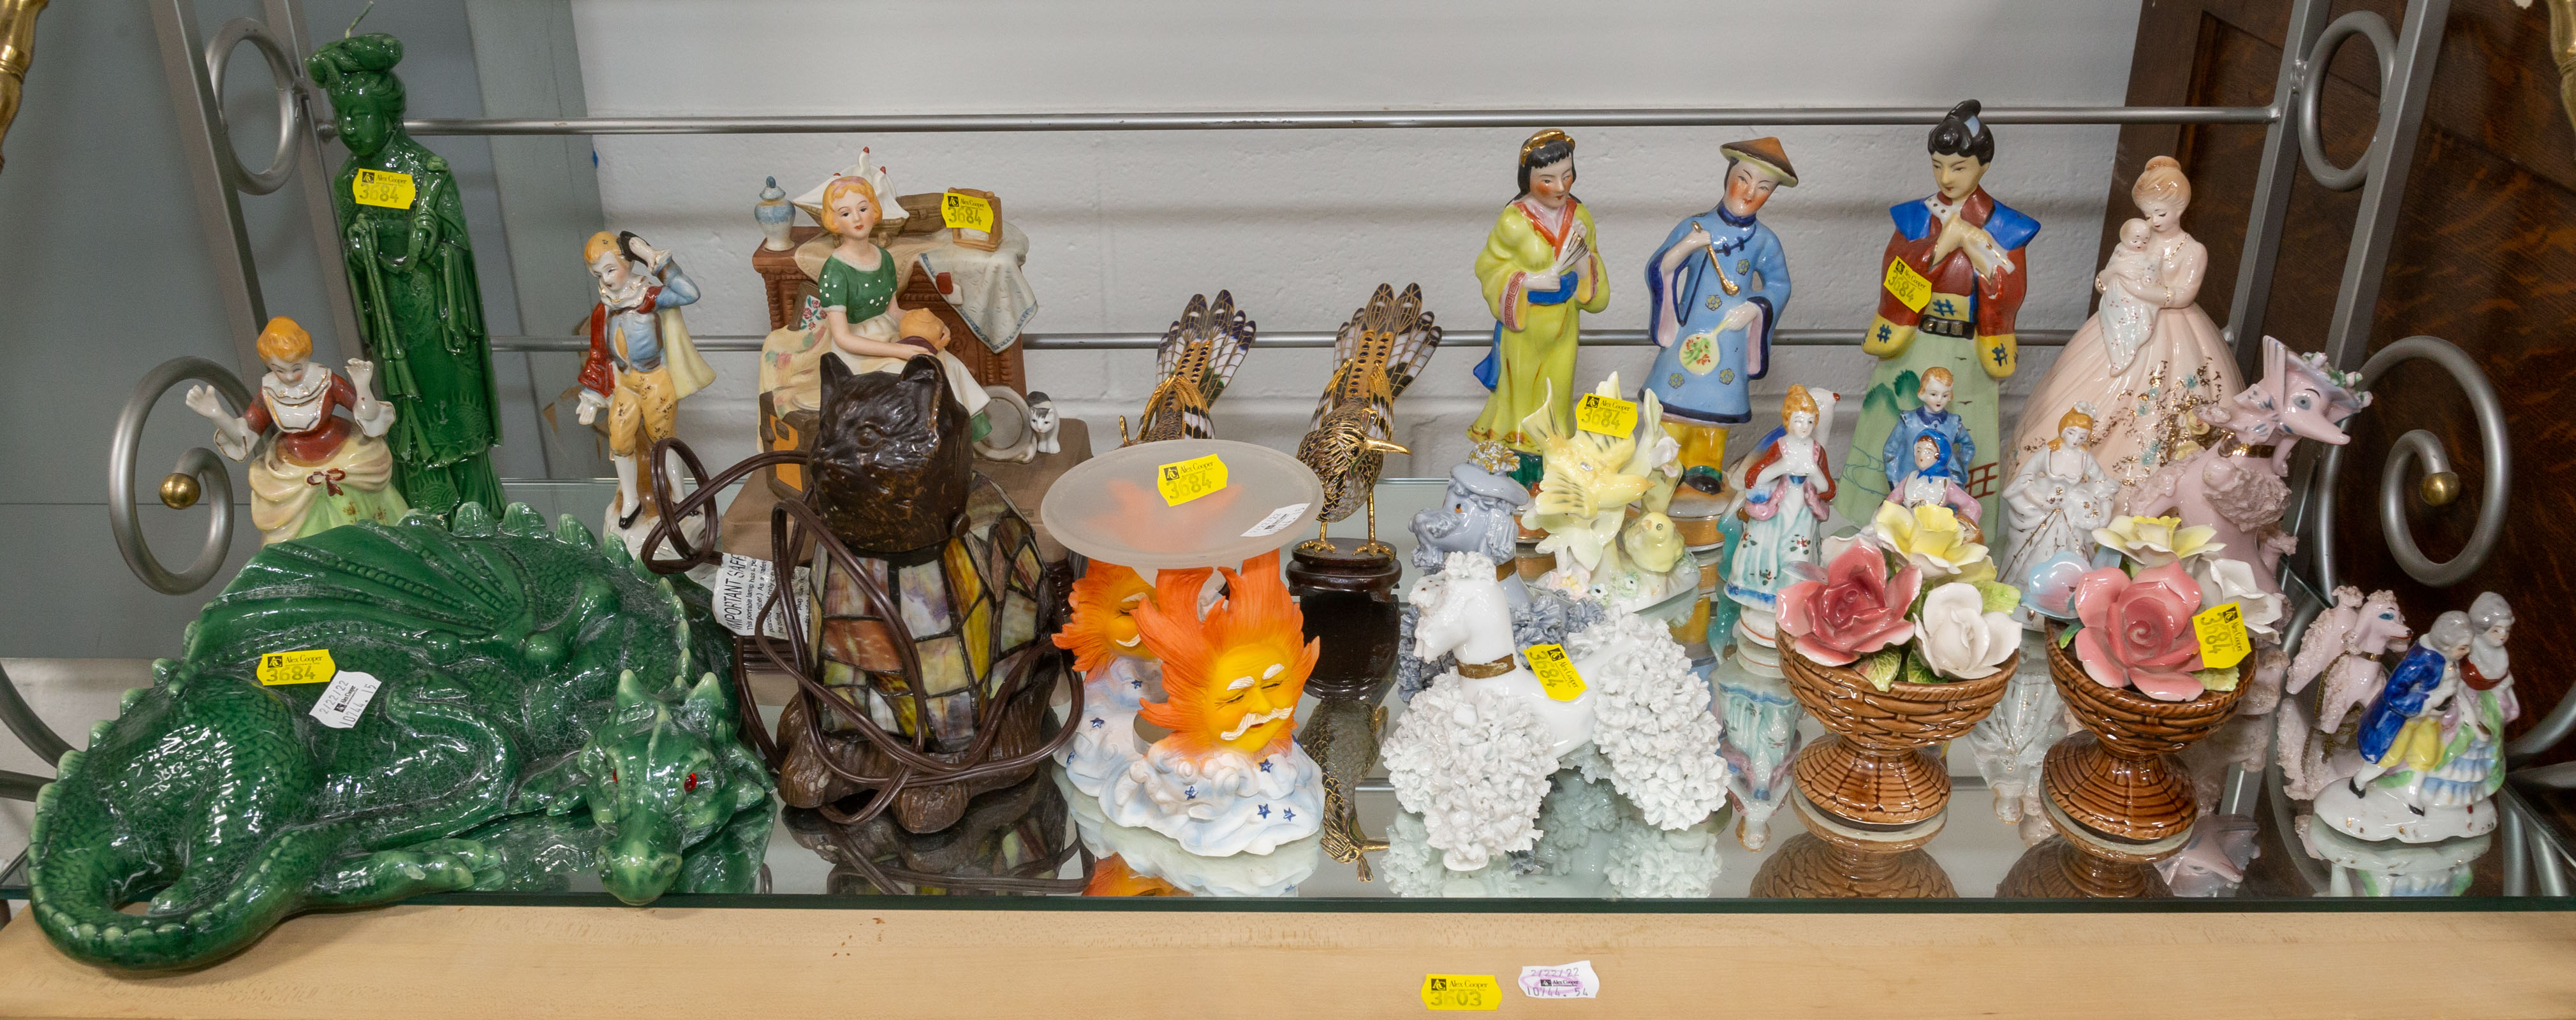 ASSORTED SMALL FIGURINES & ORNAMENTS